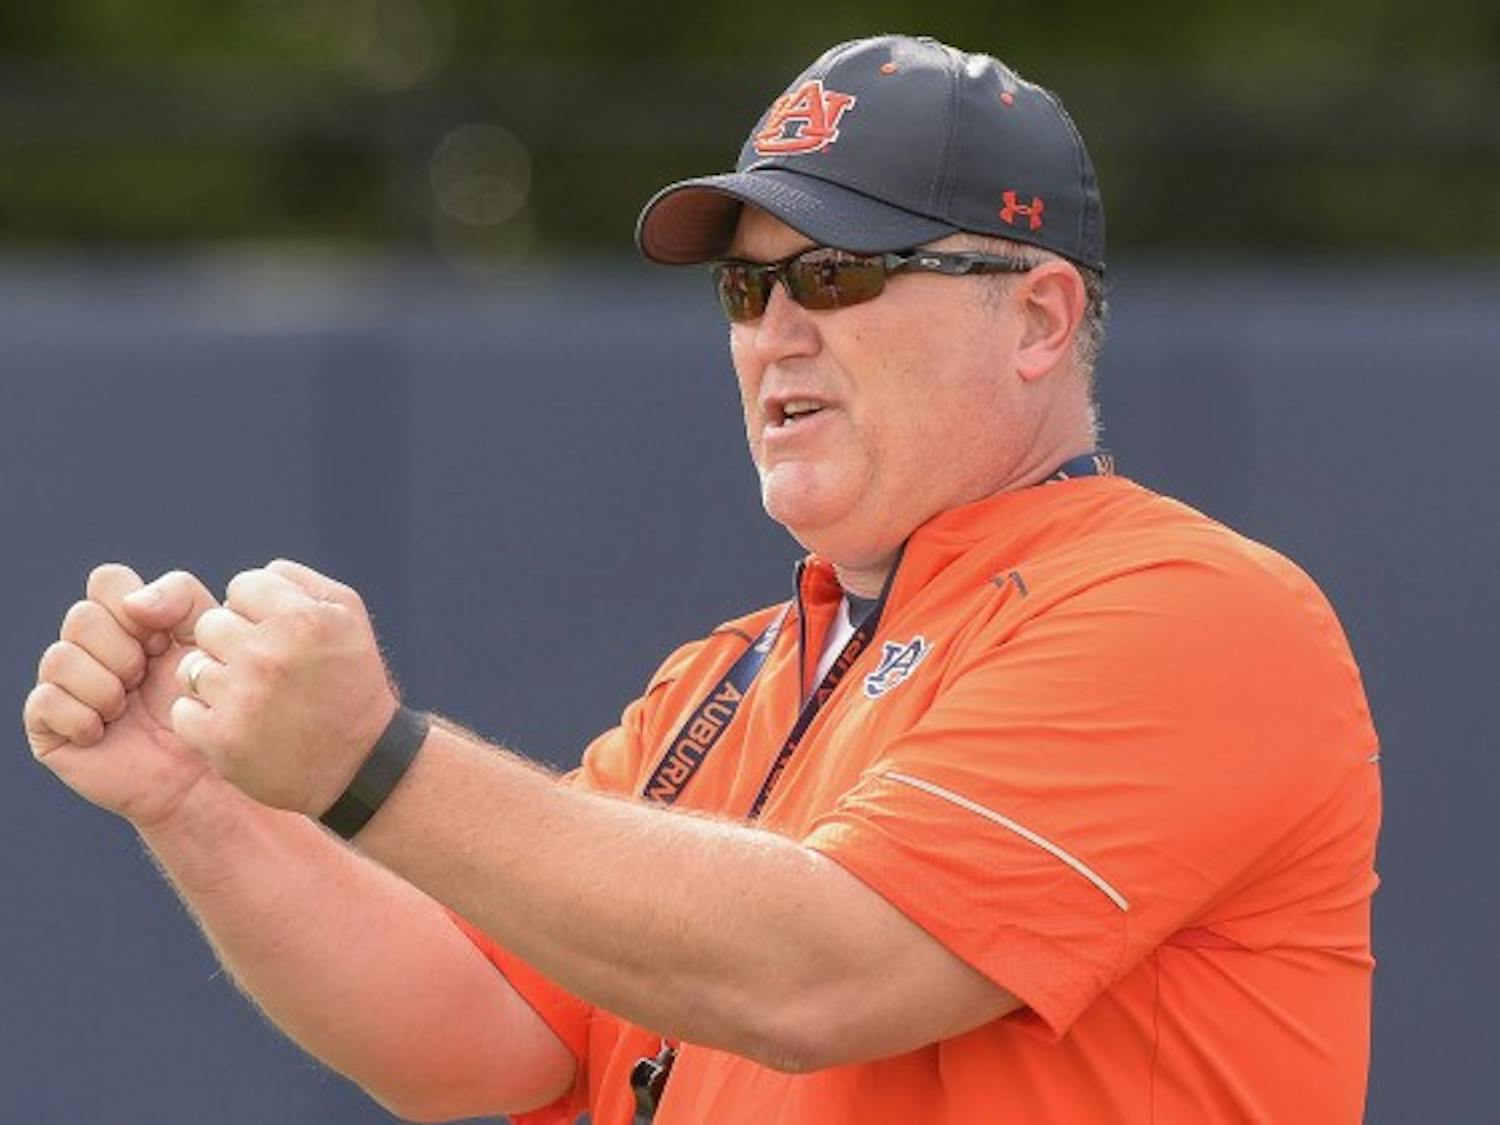 Herb Hand and Gus Malzahn are hoping to craft an offense at Auburn that matches the productivity of their previous partnership.​